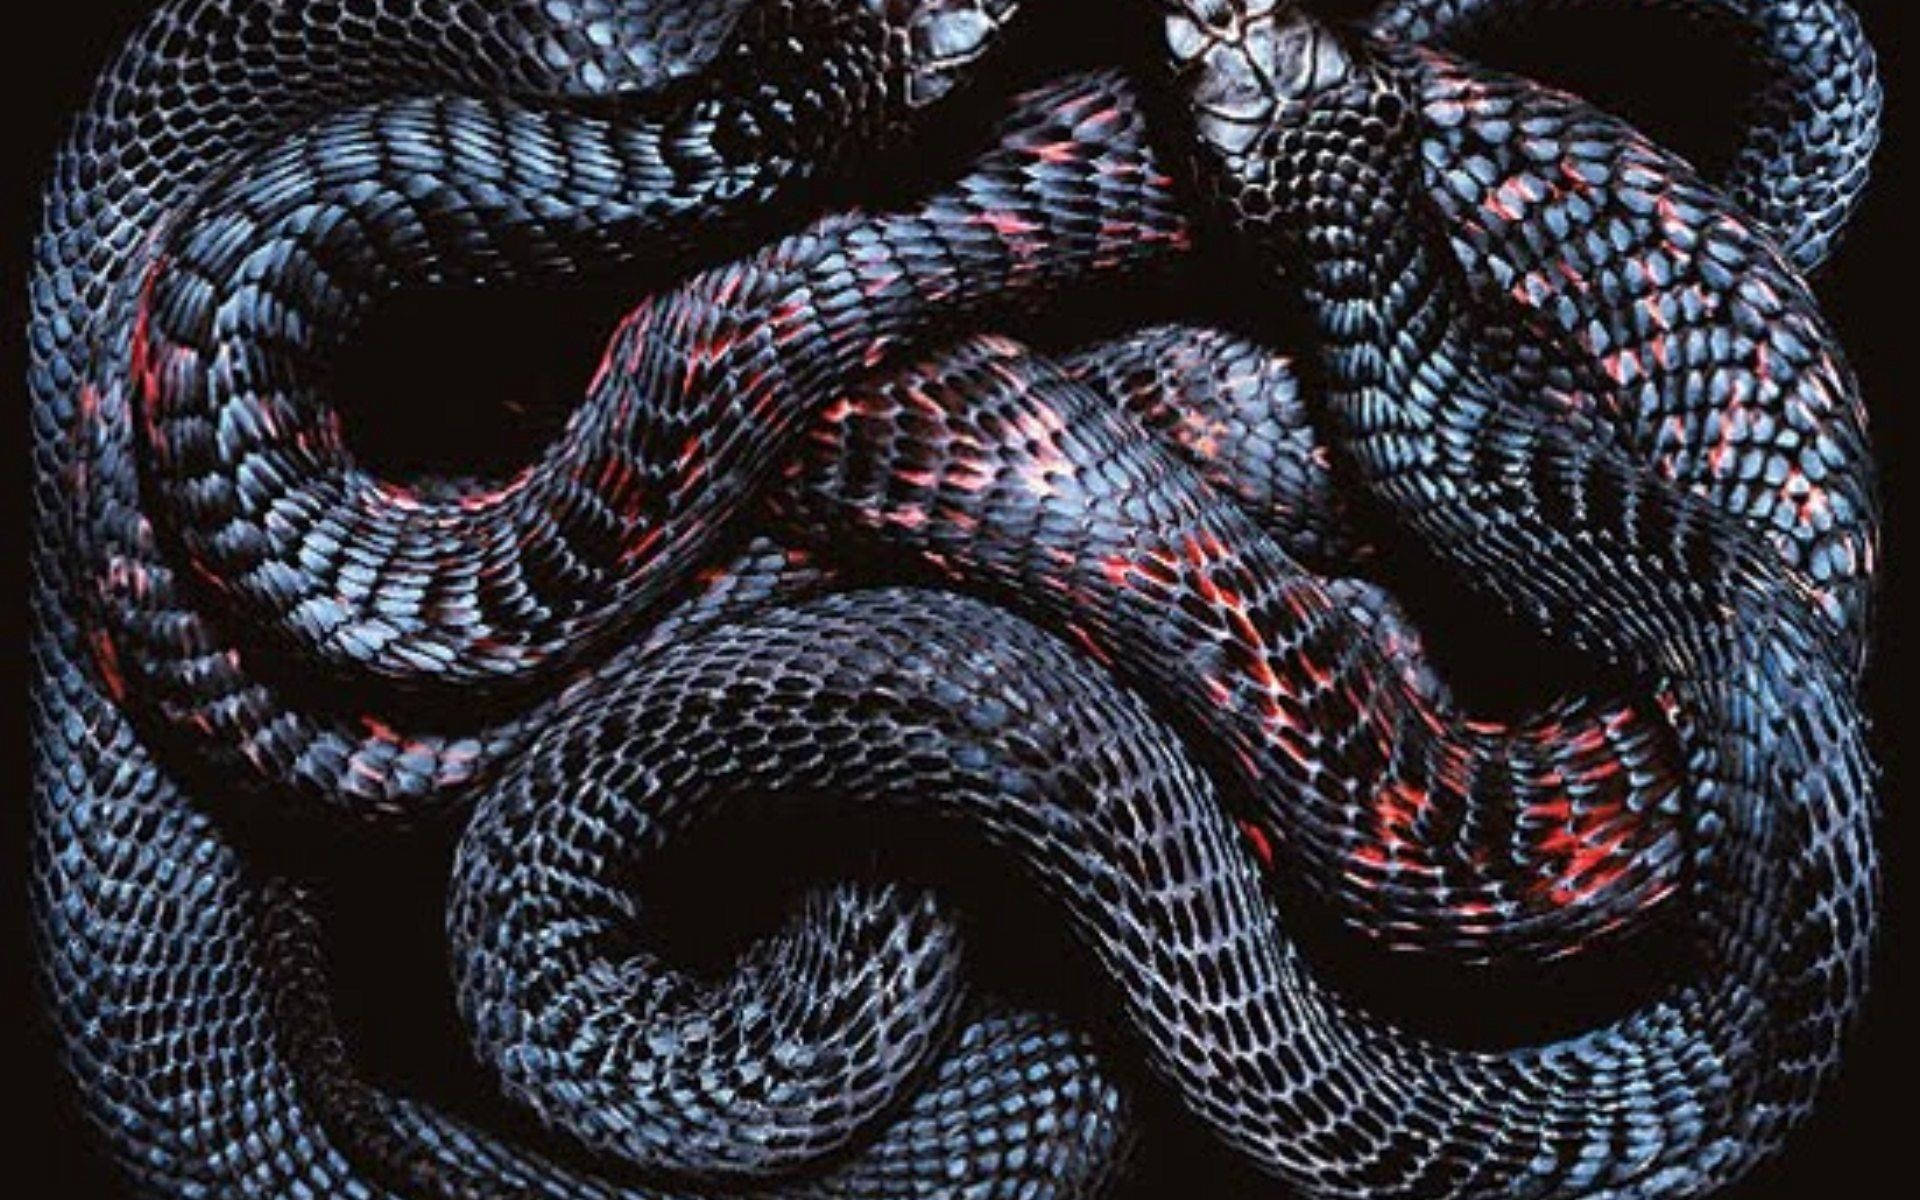 Slithery Scaled Snakes Wallpaper